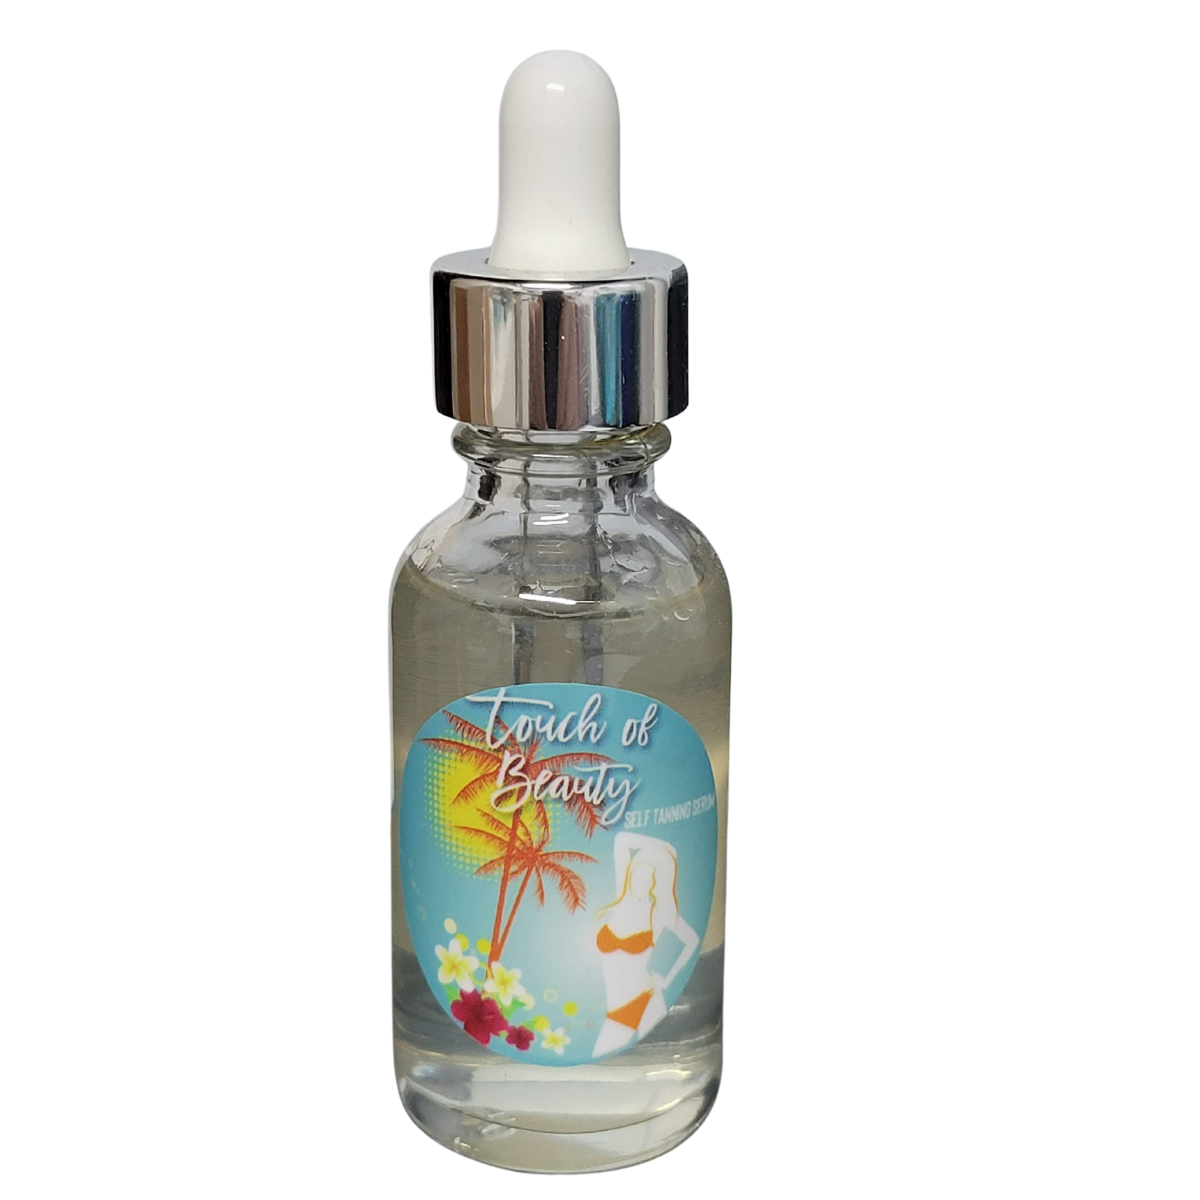 Touch of Beauty Self Tanning Serum - 1 oz